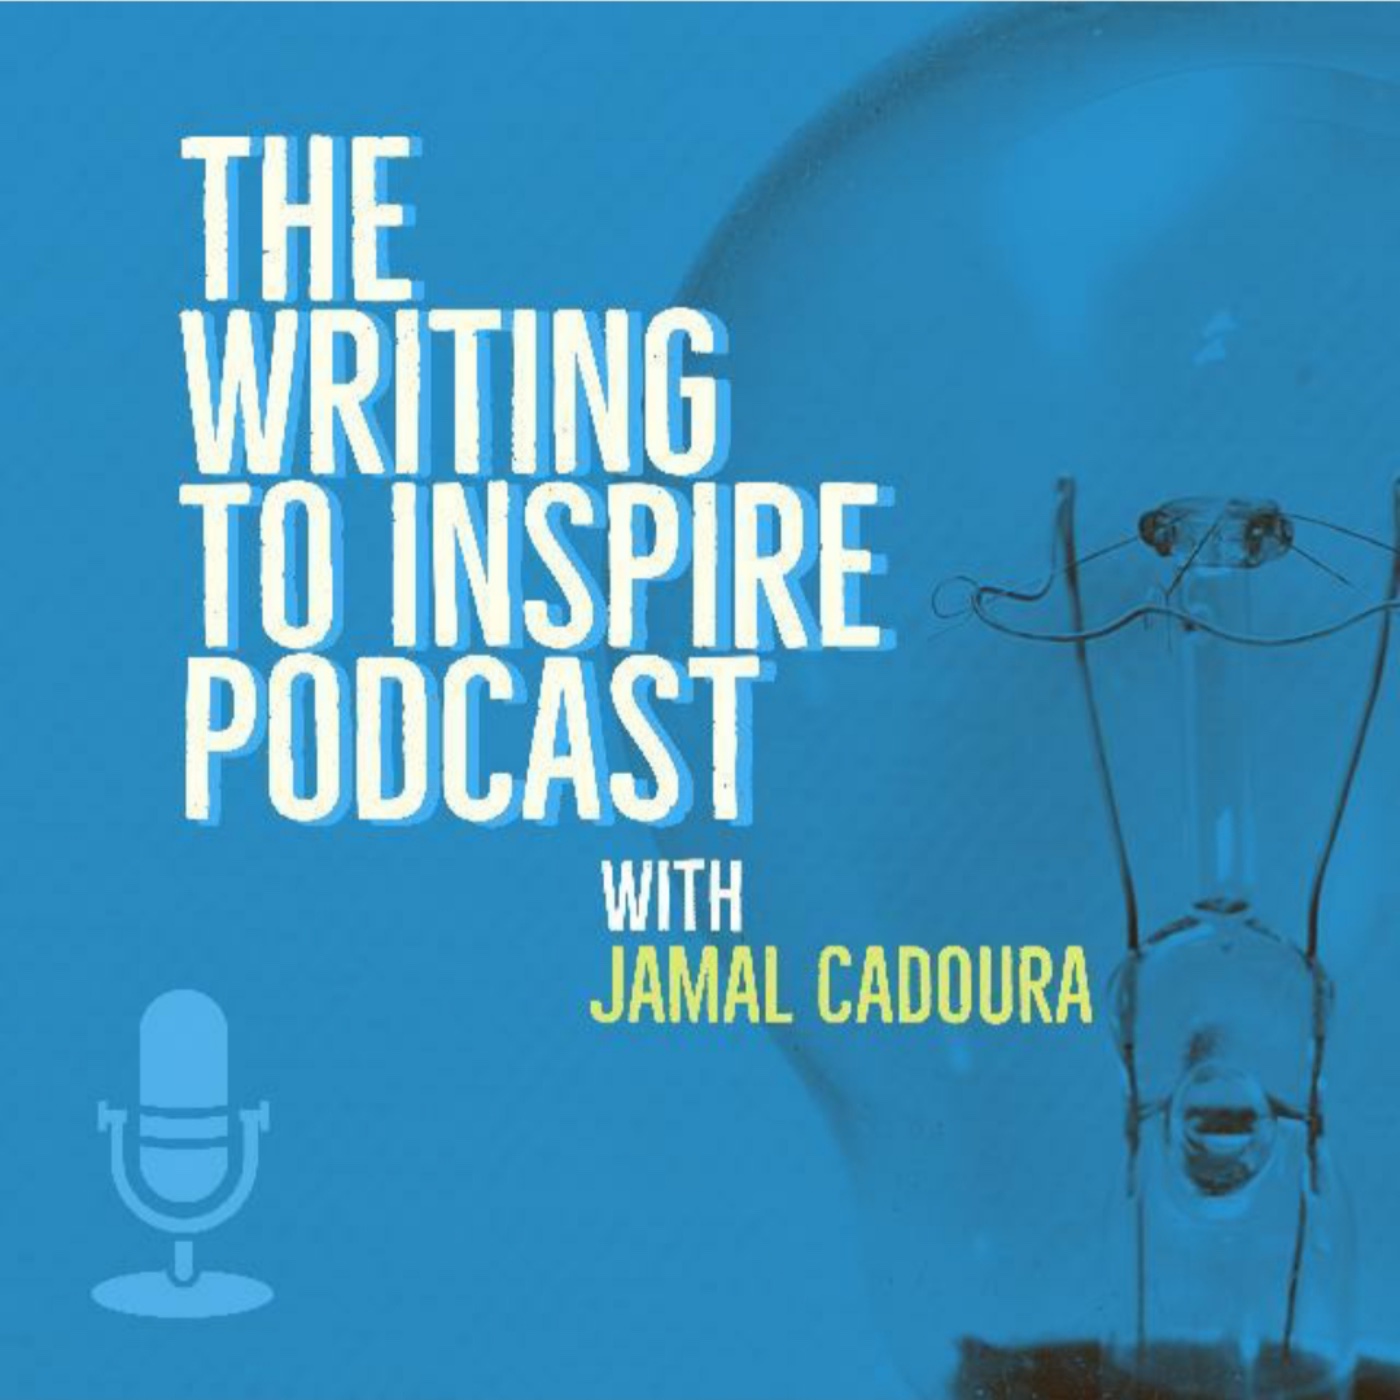 The Writing to Inspire Podcast